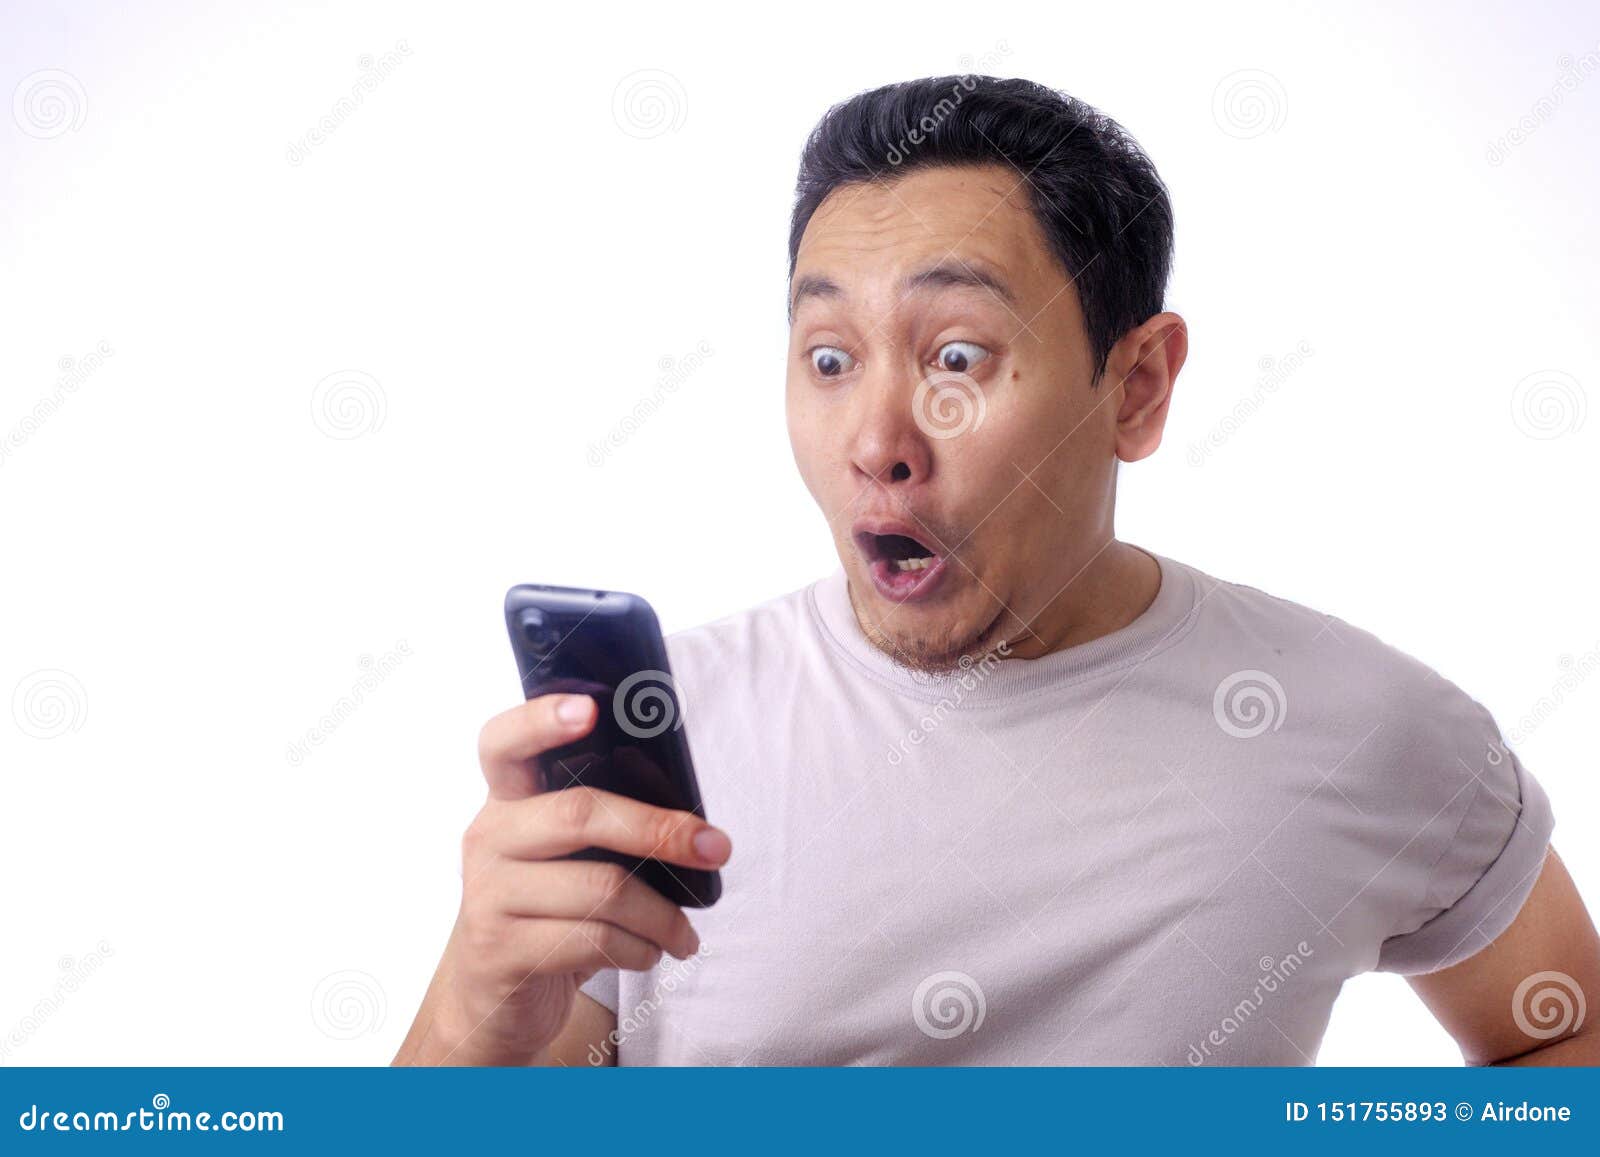 Shocked Happy Man Looking at Smart Phone Stock Image - Image of technology,  adult: 151755893